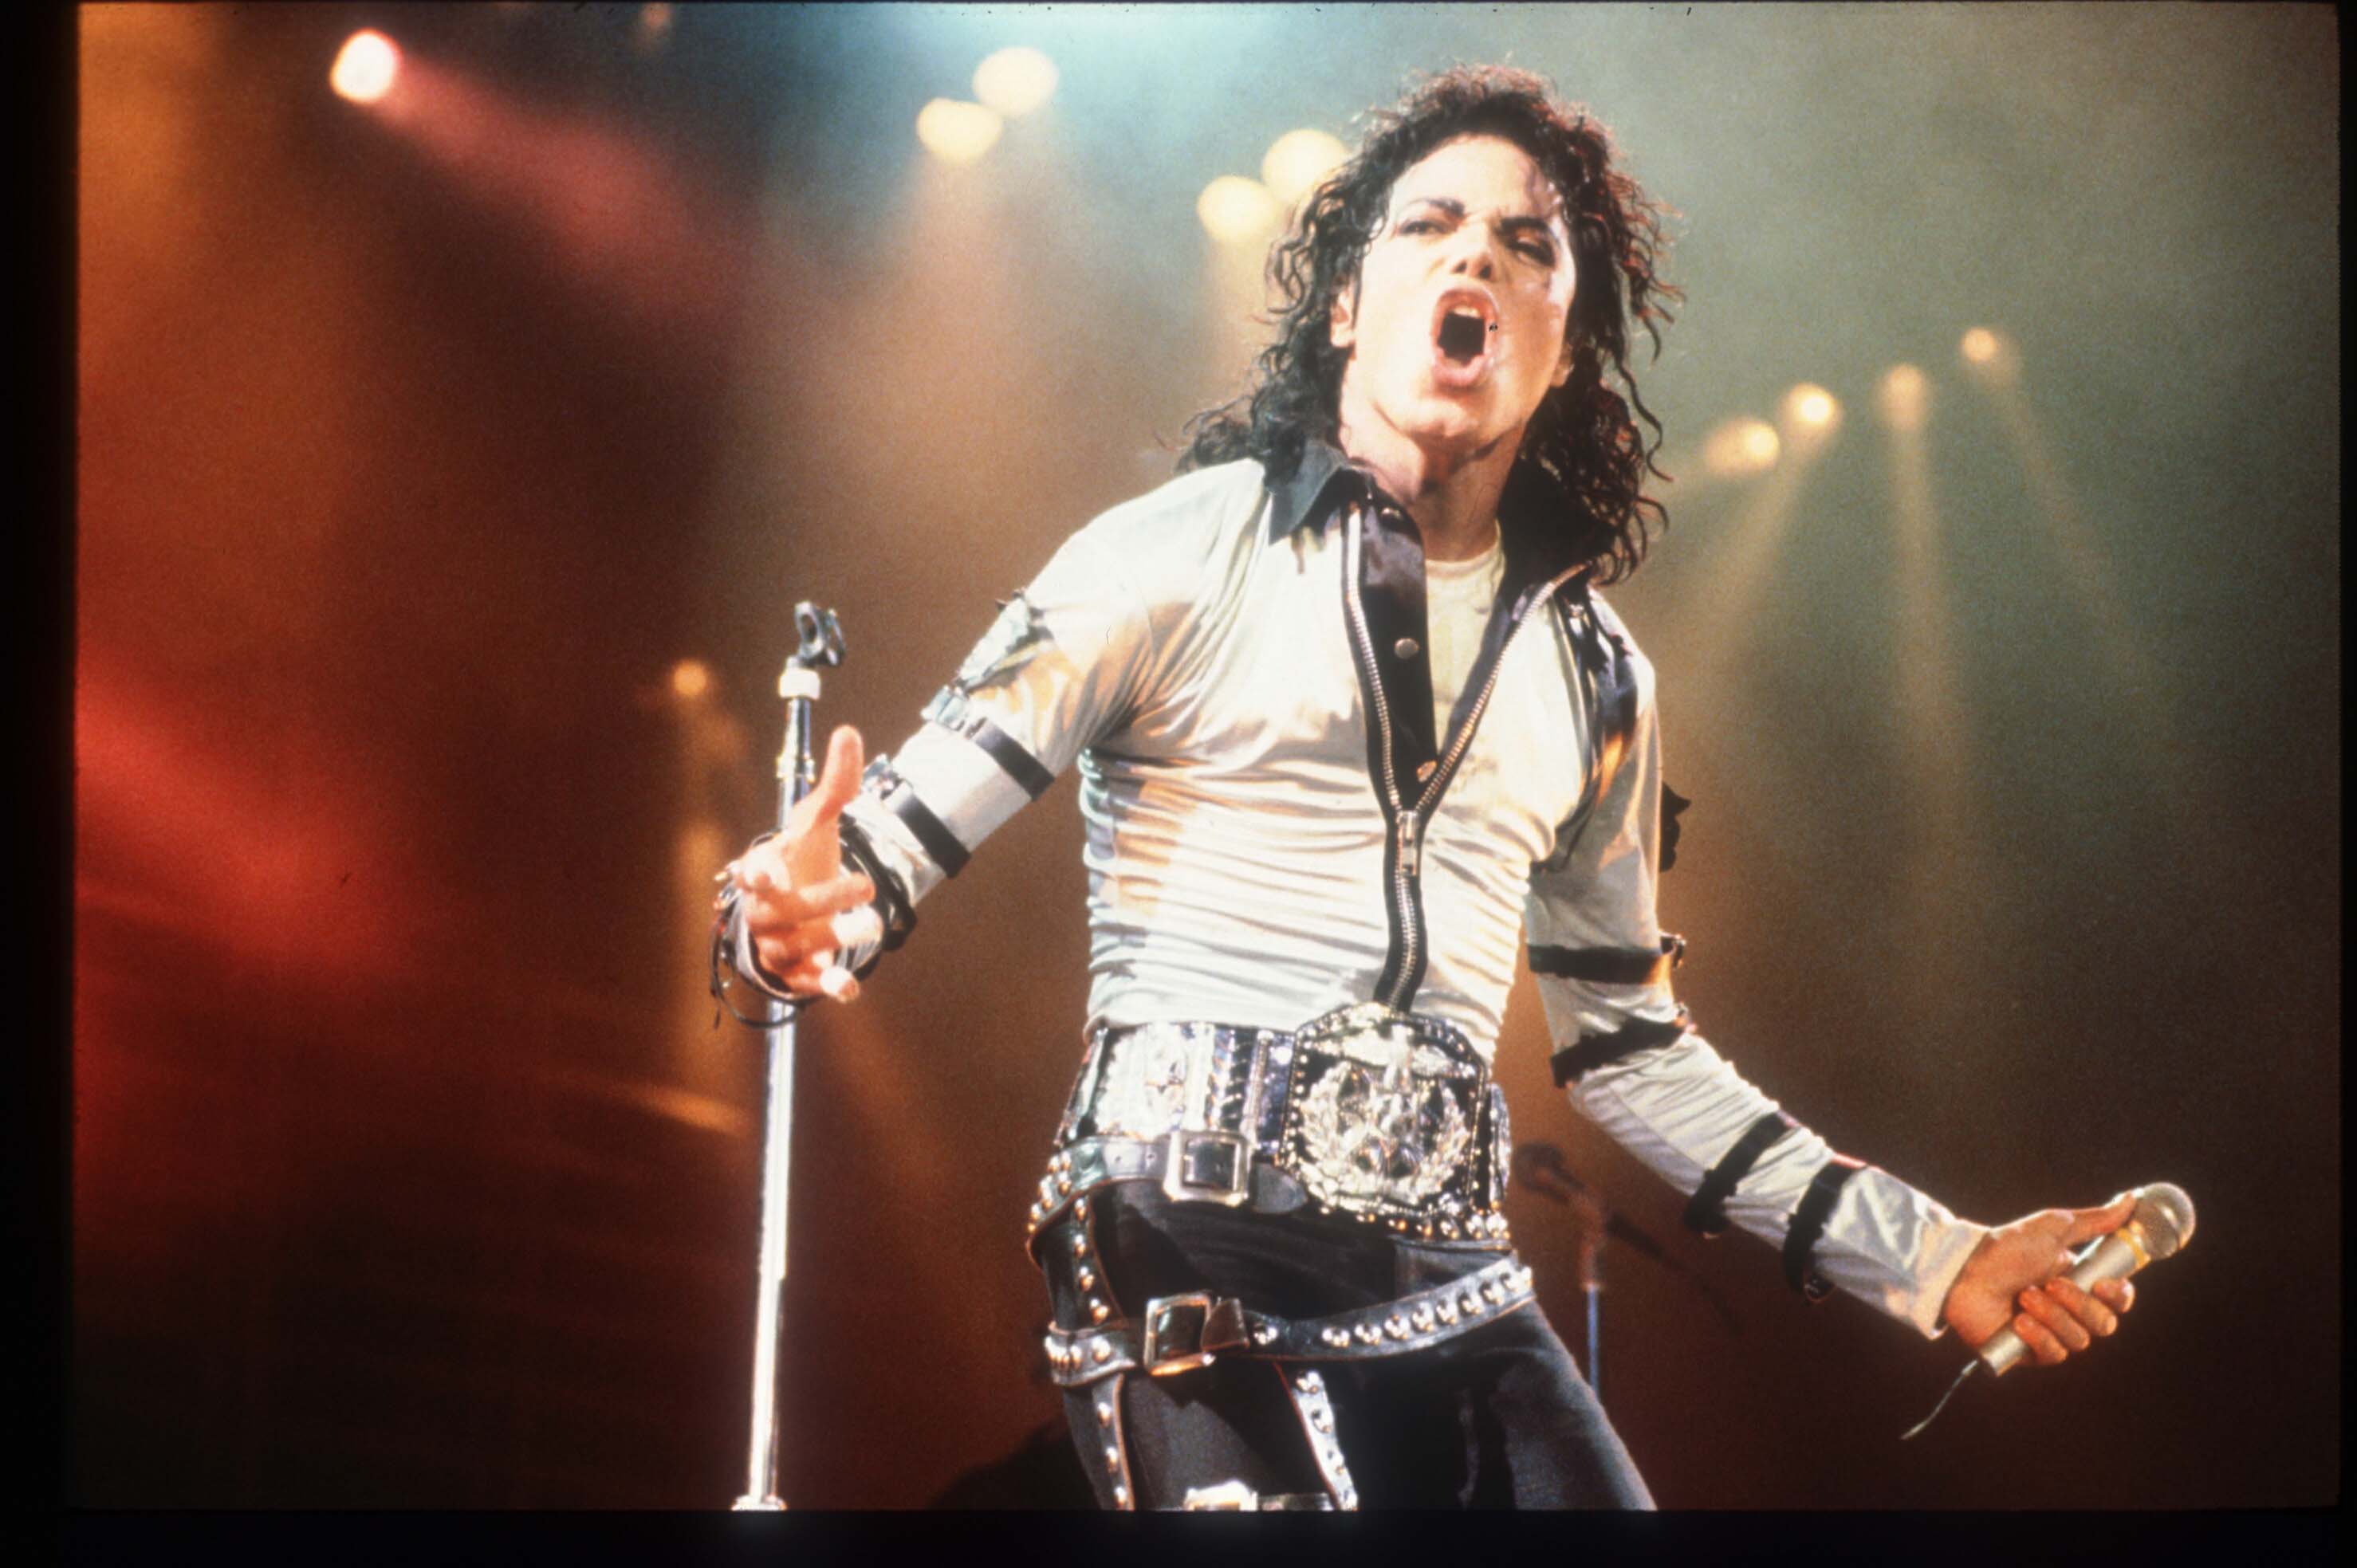 Michael Jackson performs at a concert November 8, 1988, in California. | Source: Getty Images